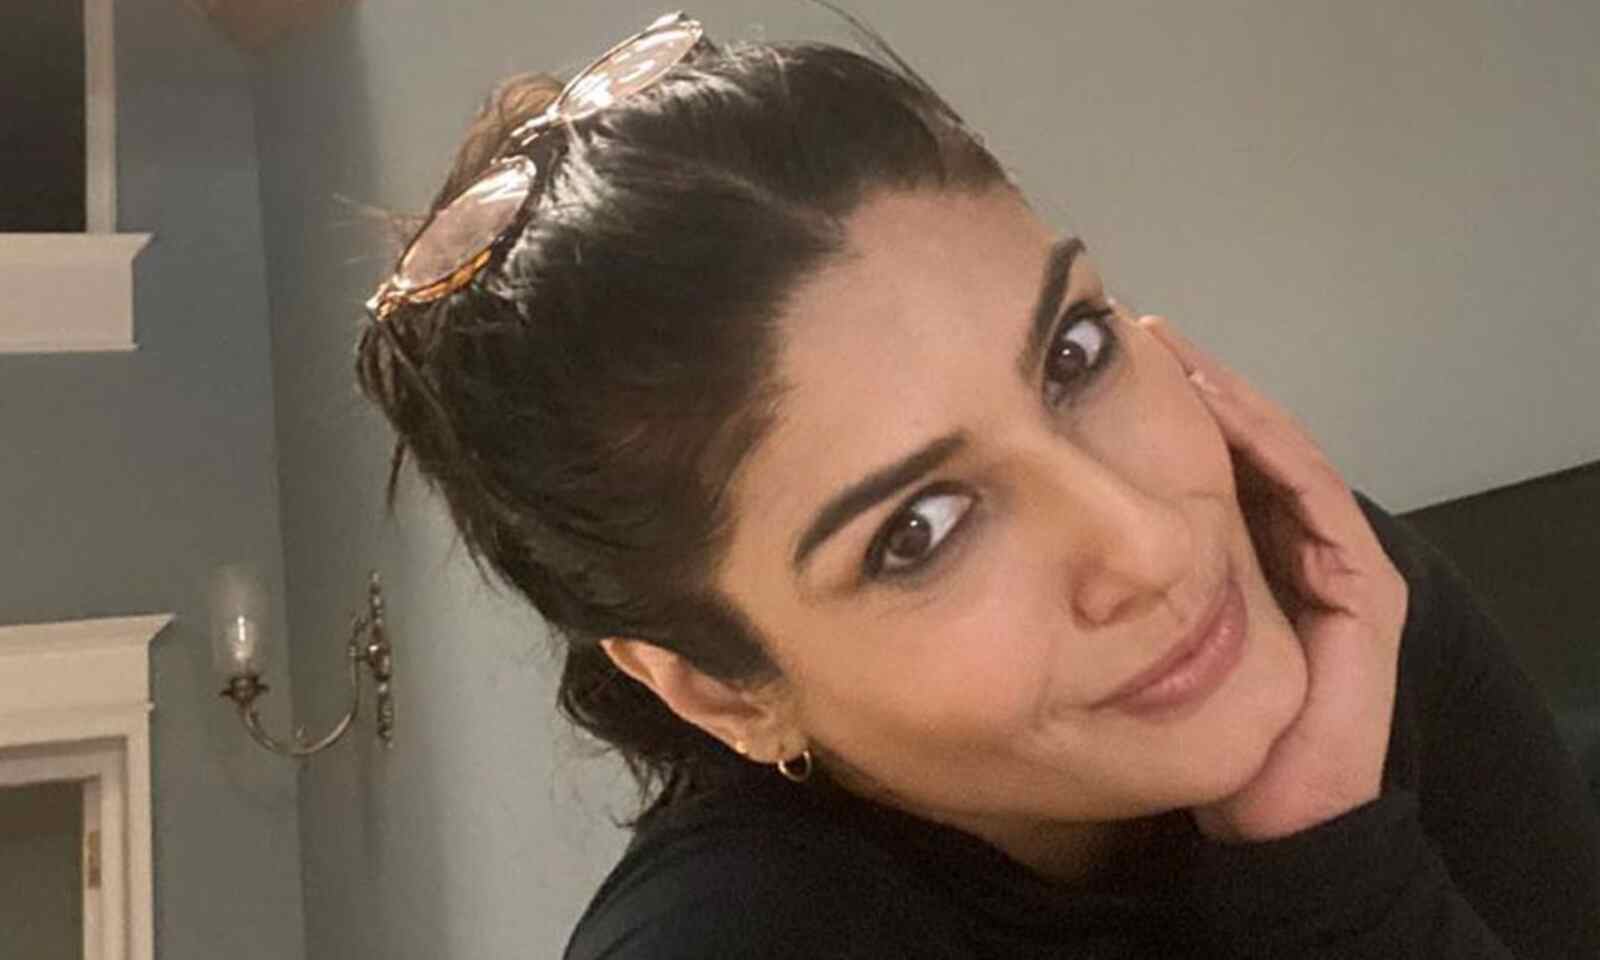 Raveena Tandon gets new hairstyle as she waits for flight to take off   Celebrities News  India TV